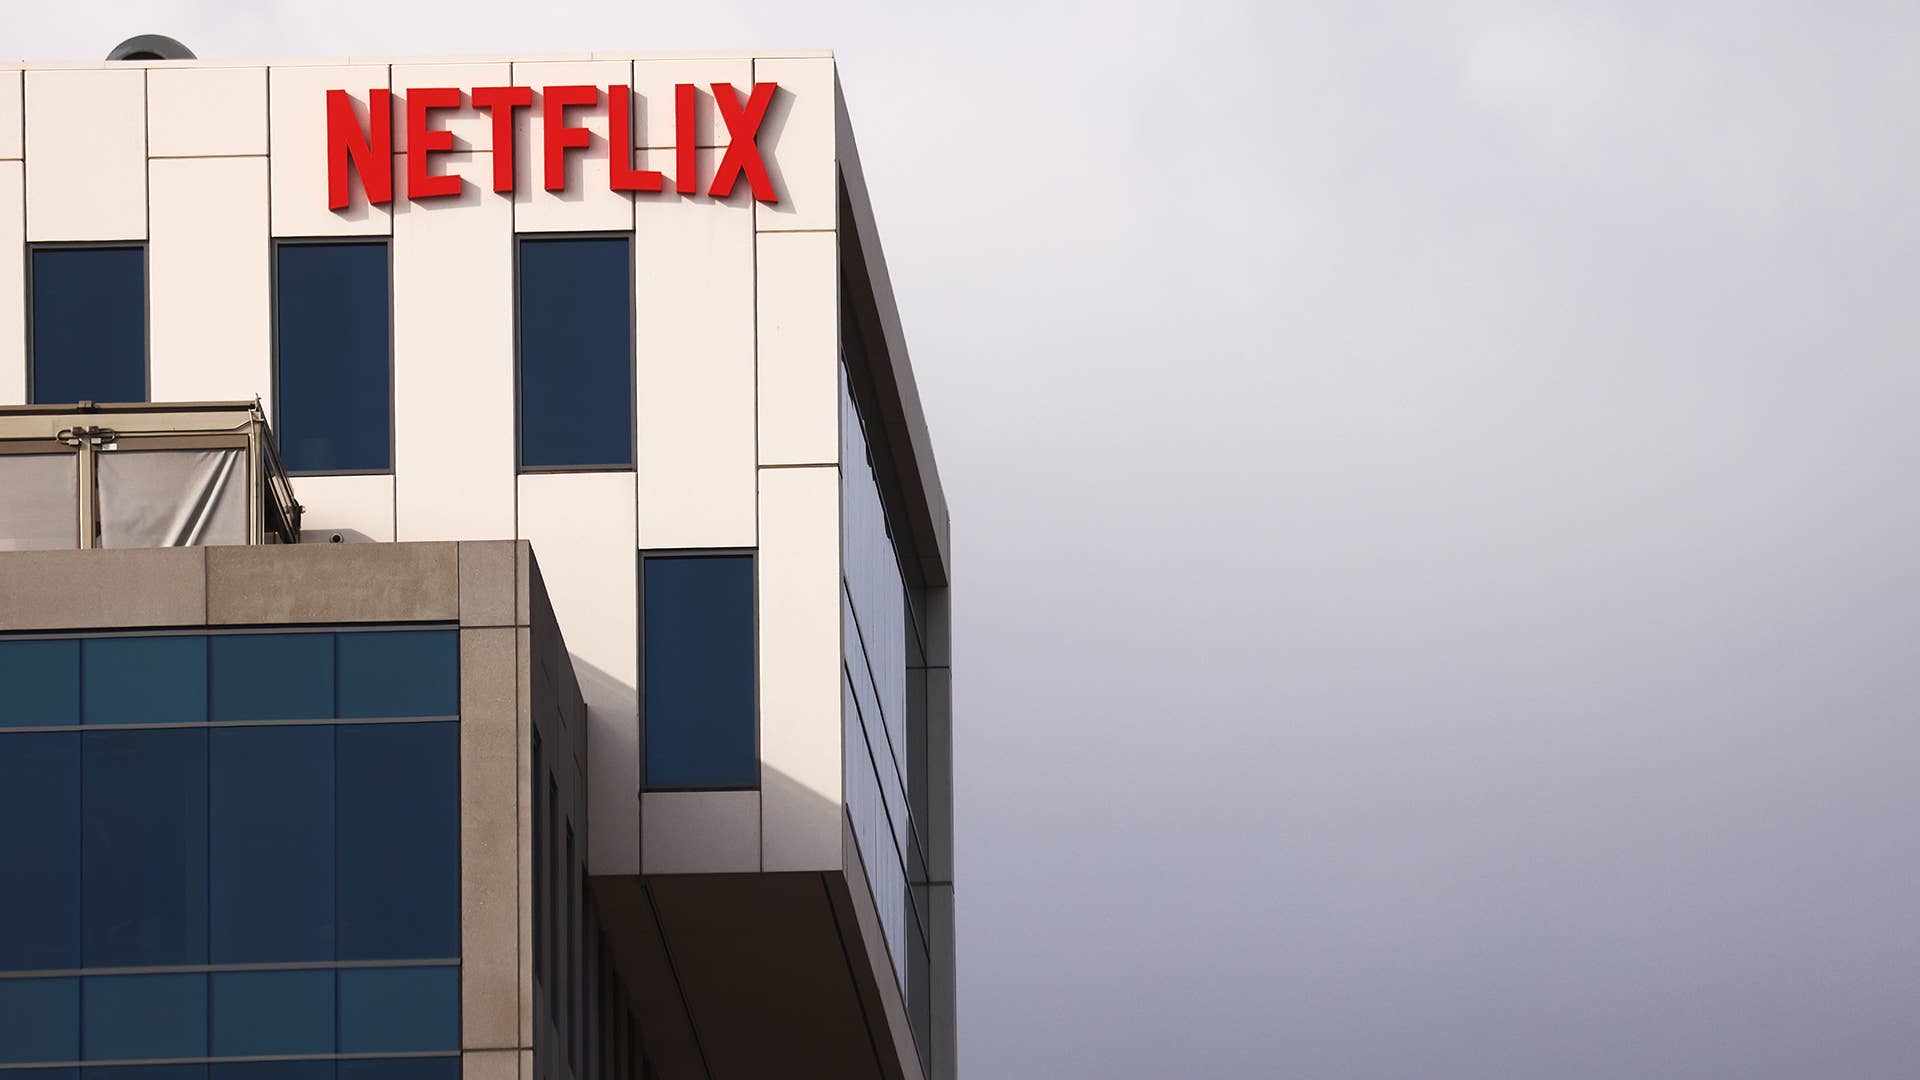 The Netflix logo is displayed at Netflix's Los Angeles headquarters on October 07, 2021 in Los Angeles.